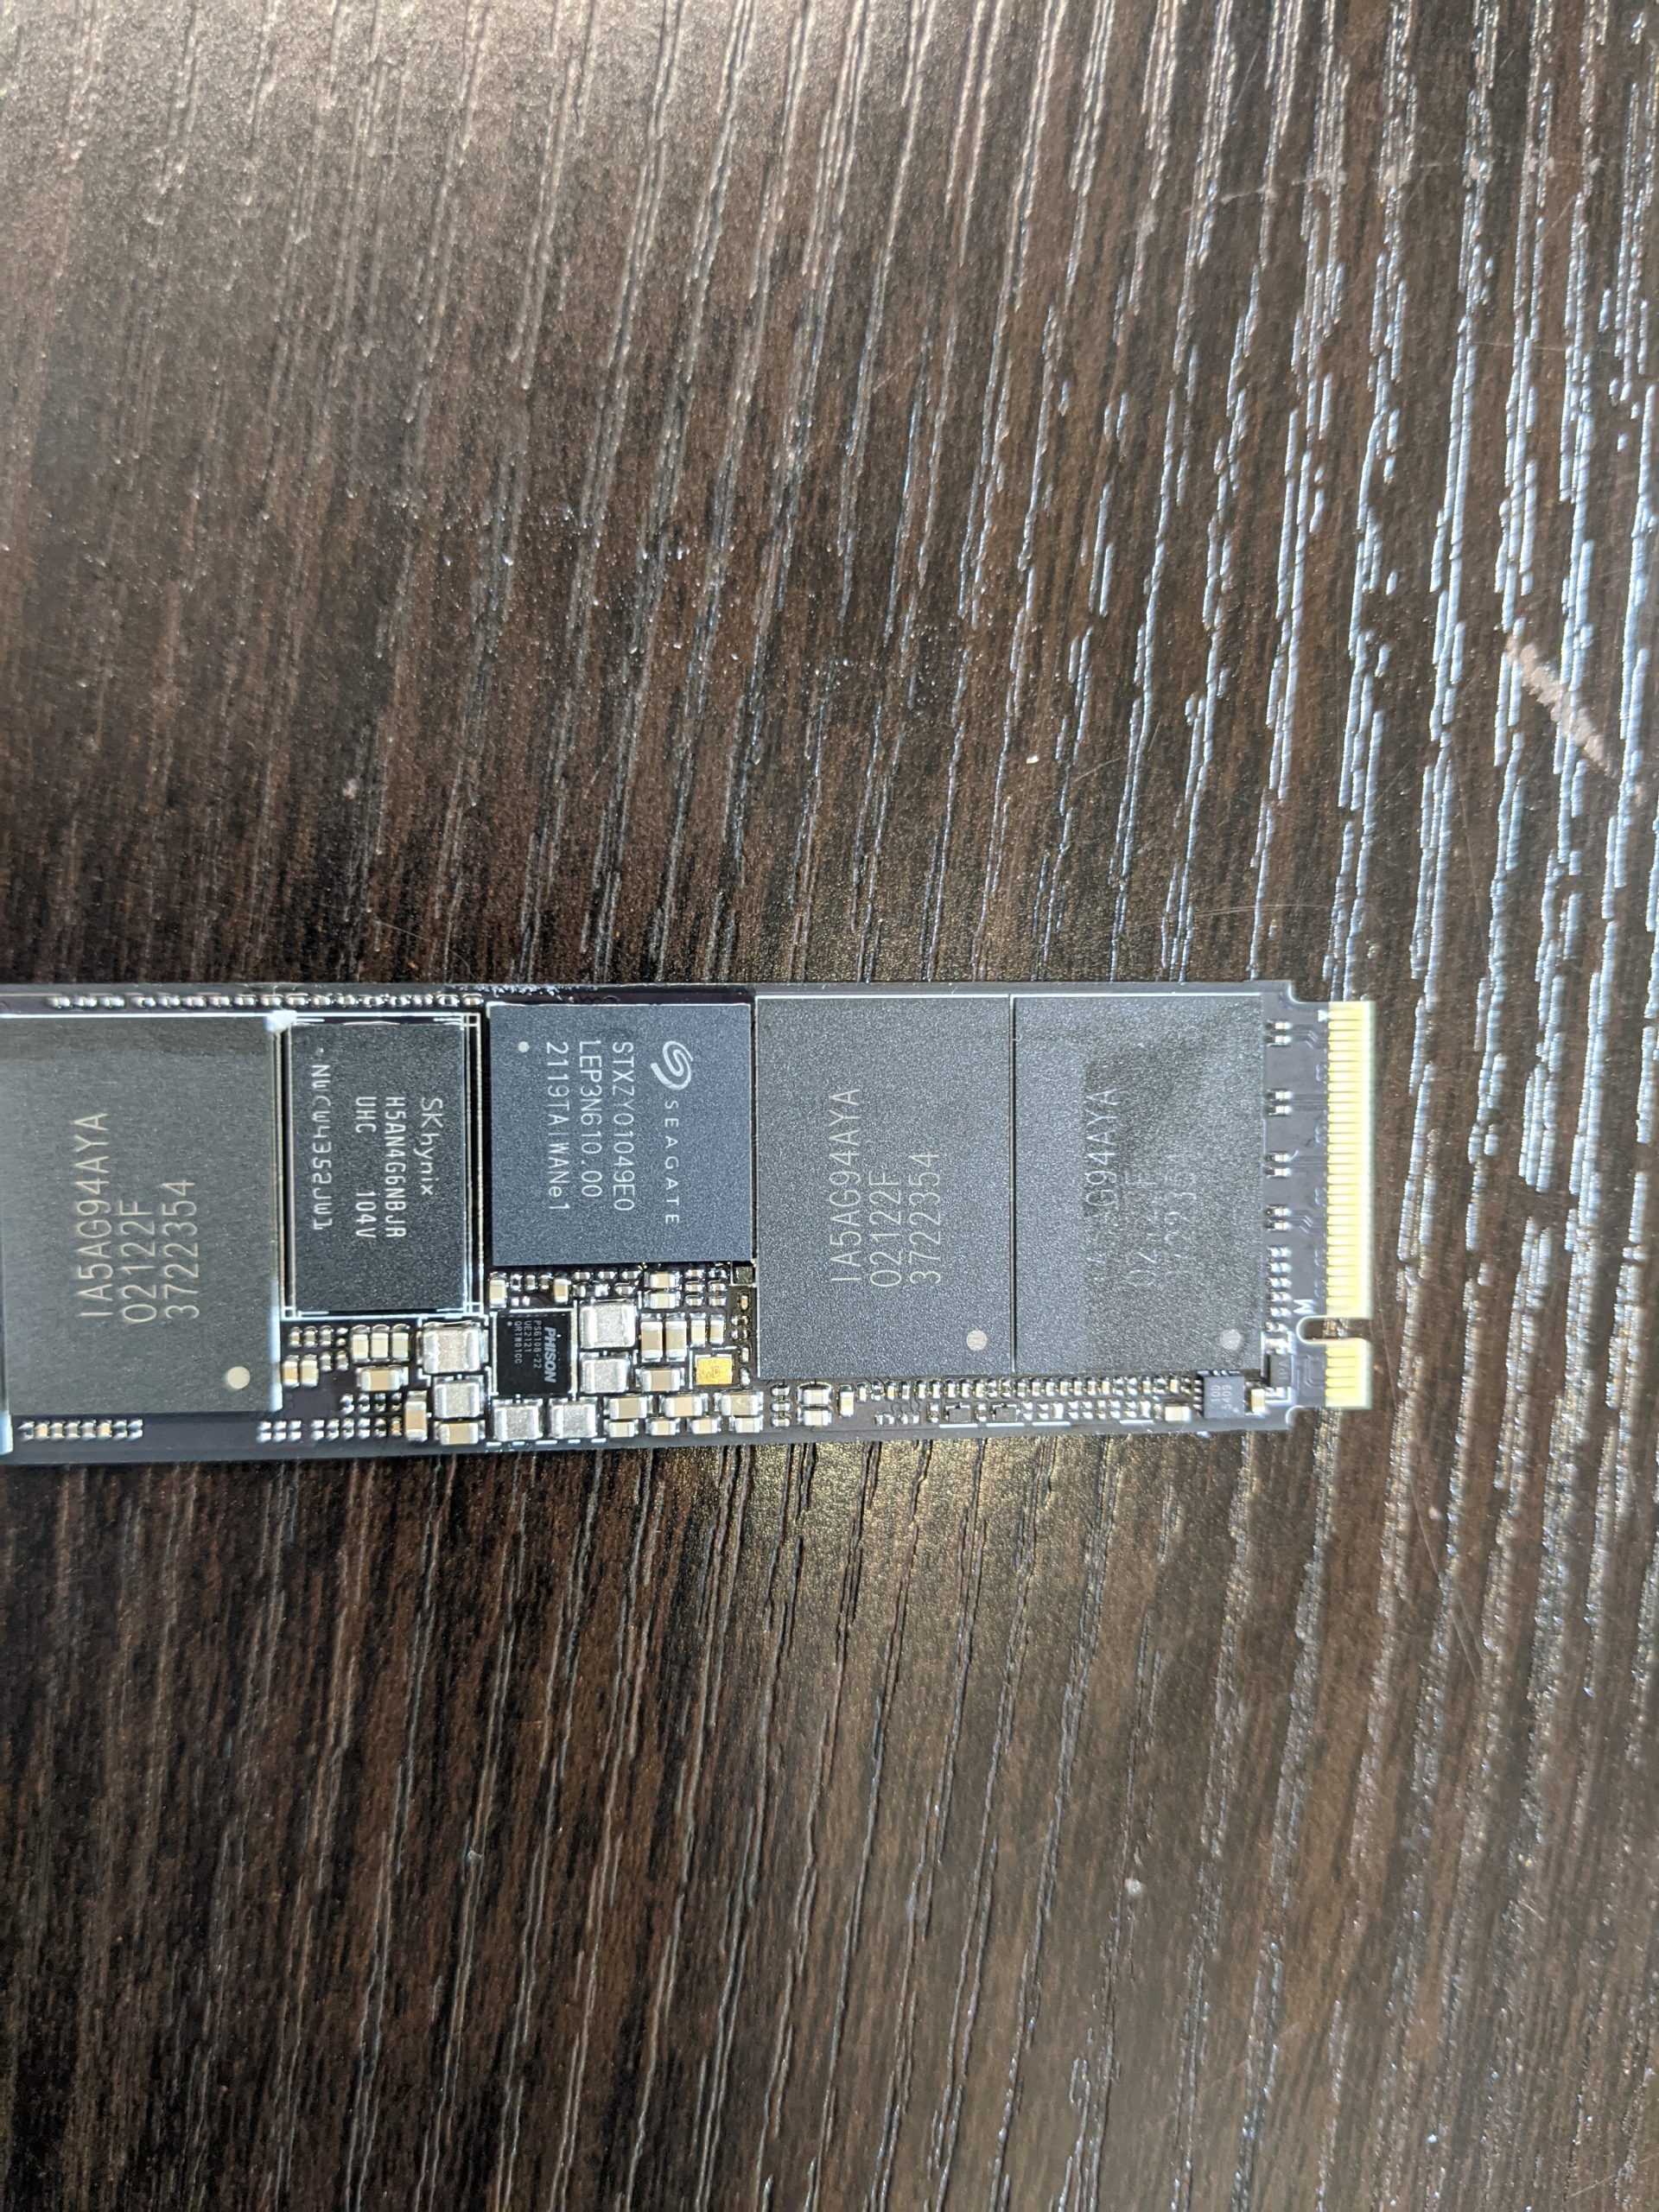 Seagate FireCuda 530 1TB NVMe SSD Review Sustained Write King - Page 3 of 3